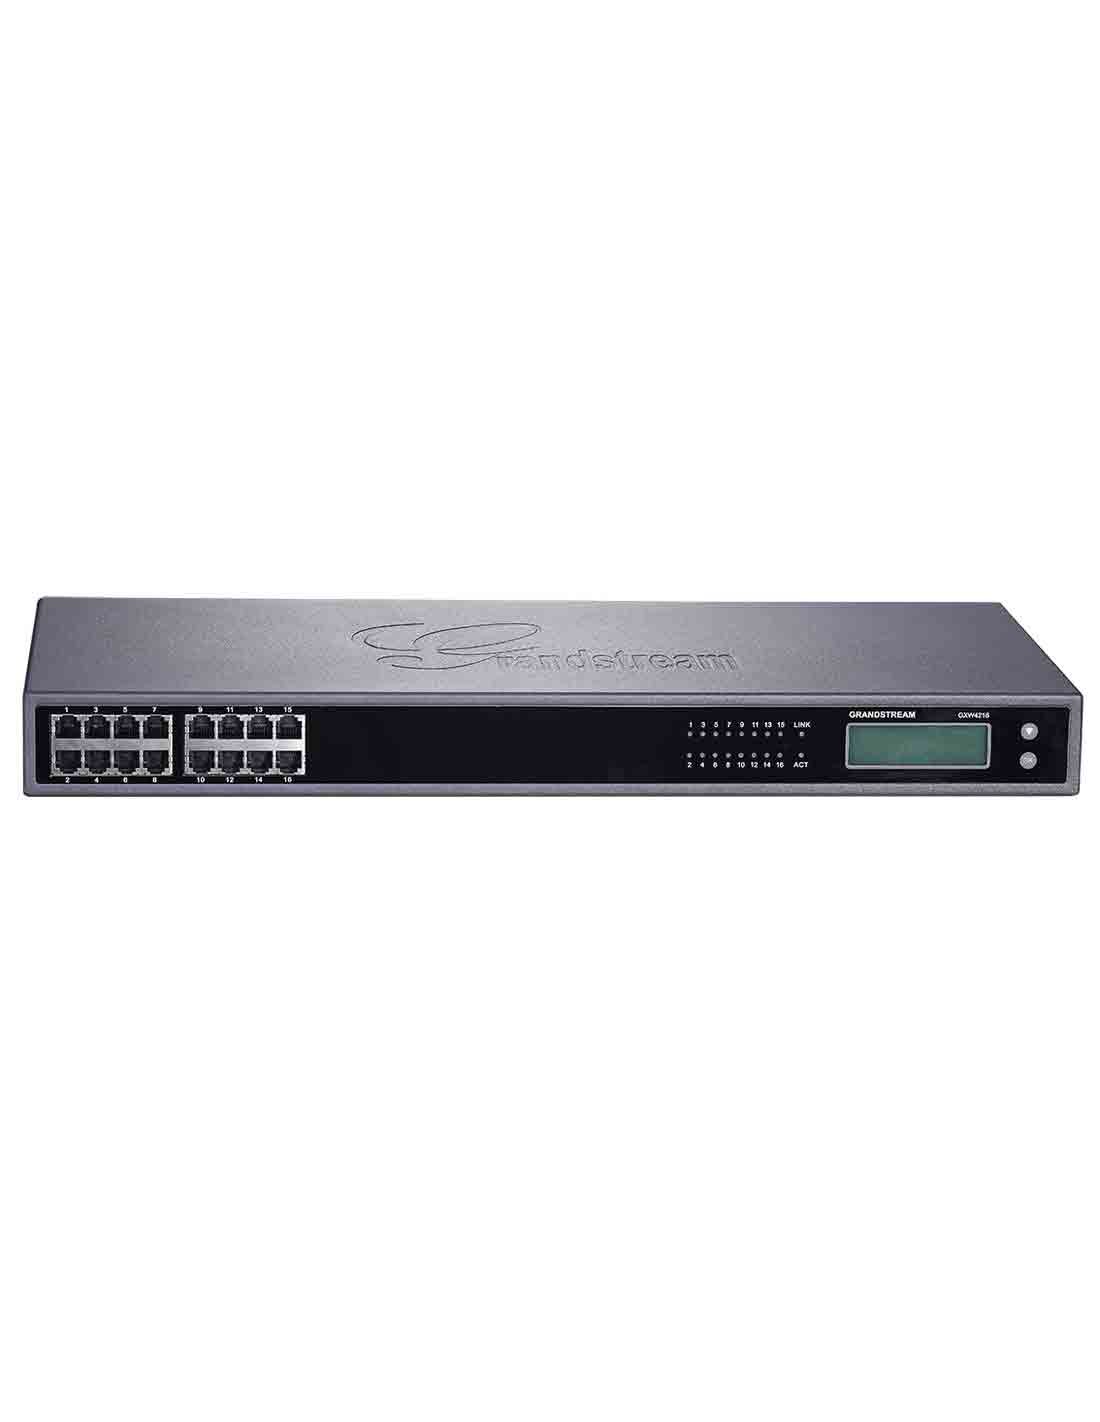 Grandstream GXW4216 FXS IP Gateway with best deal options affordable price and free delivery in Dubai